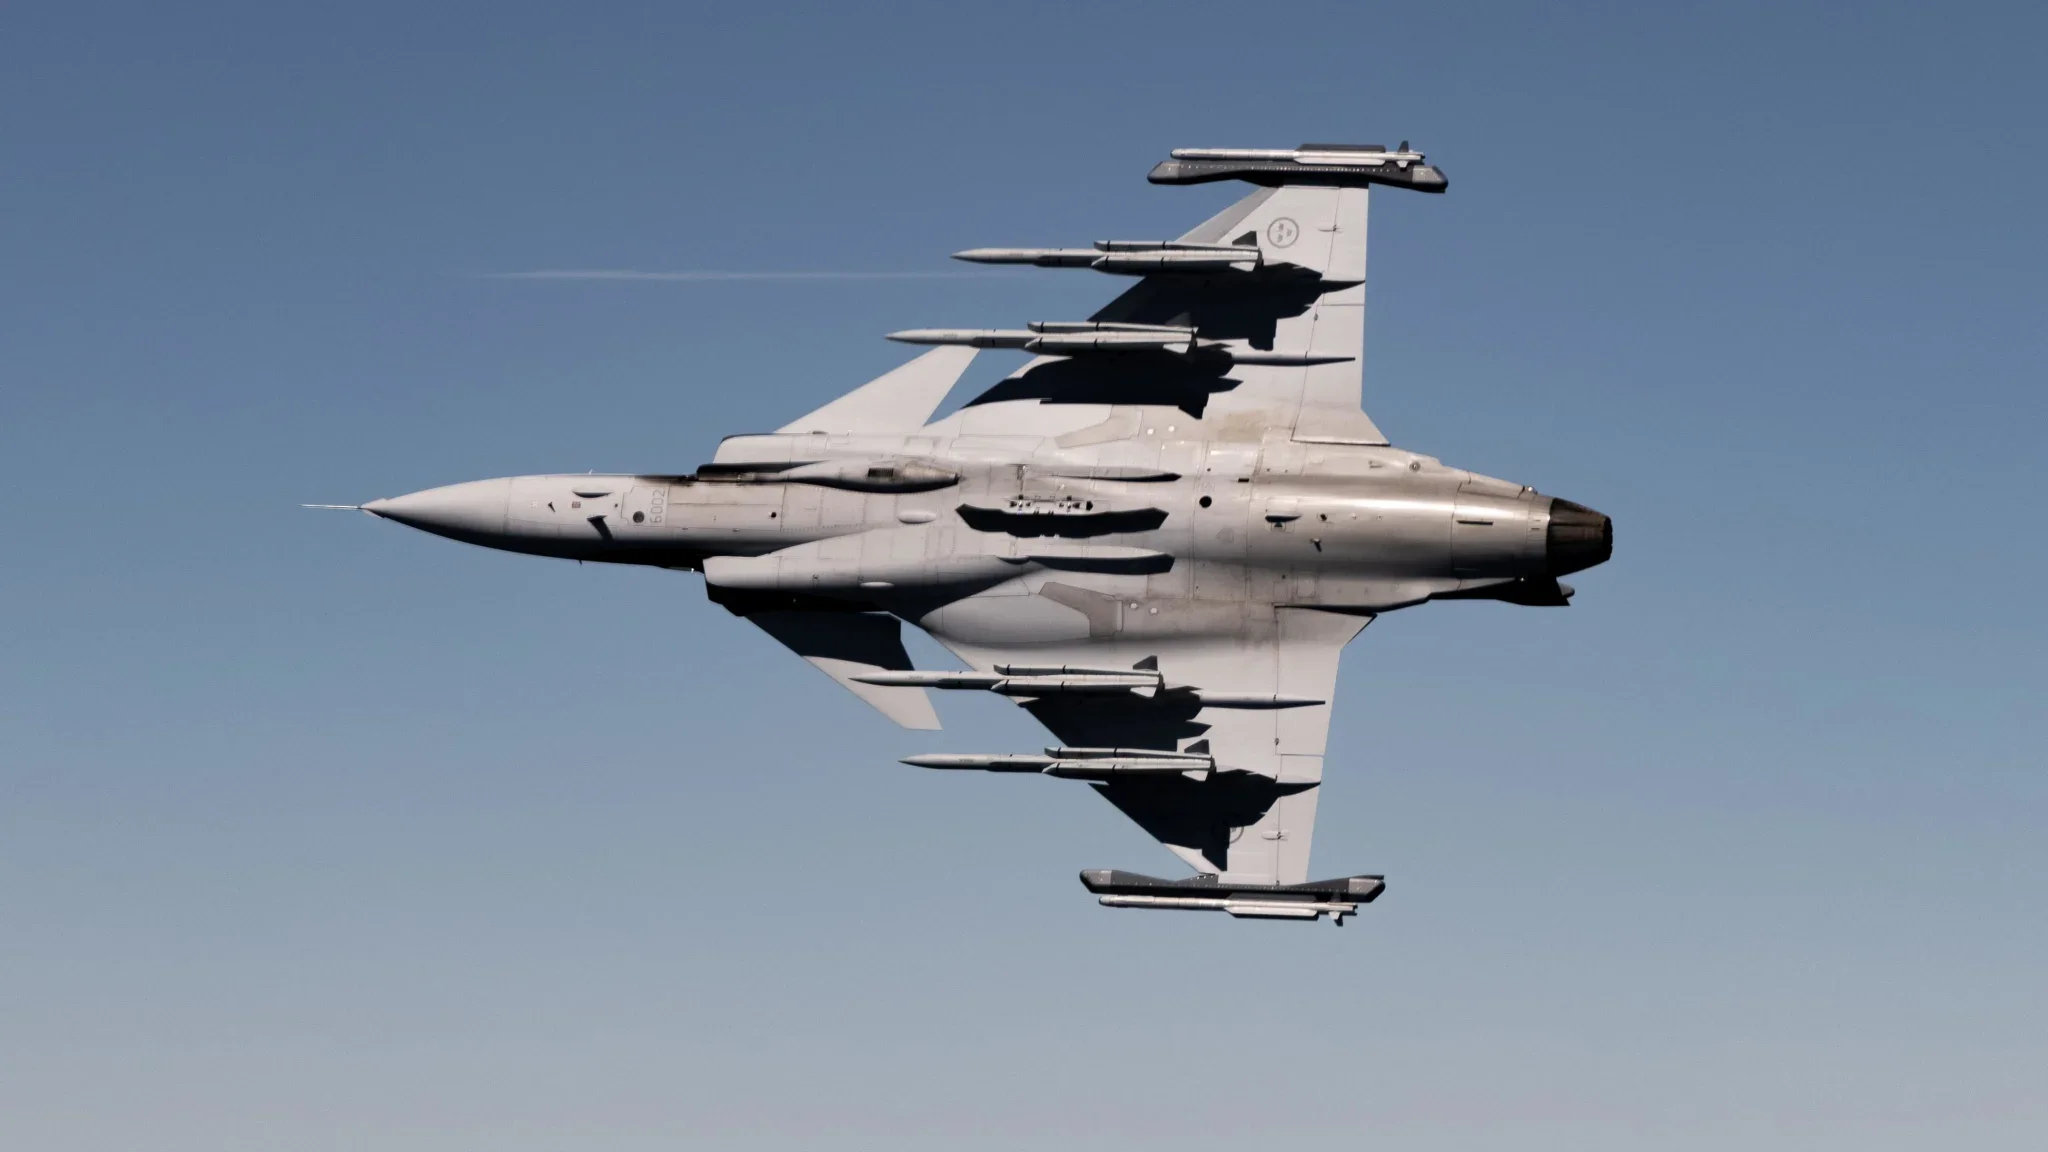 Saab to provide new launch system for Swedish Gripen aircraft